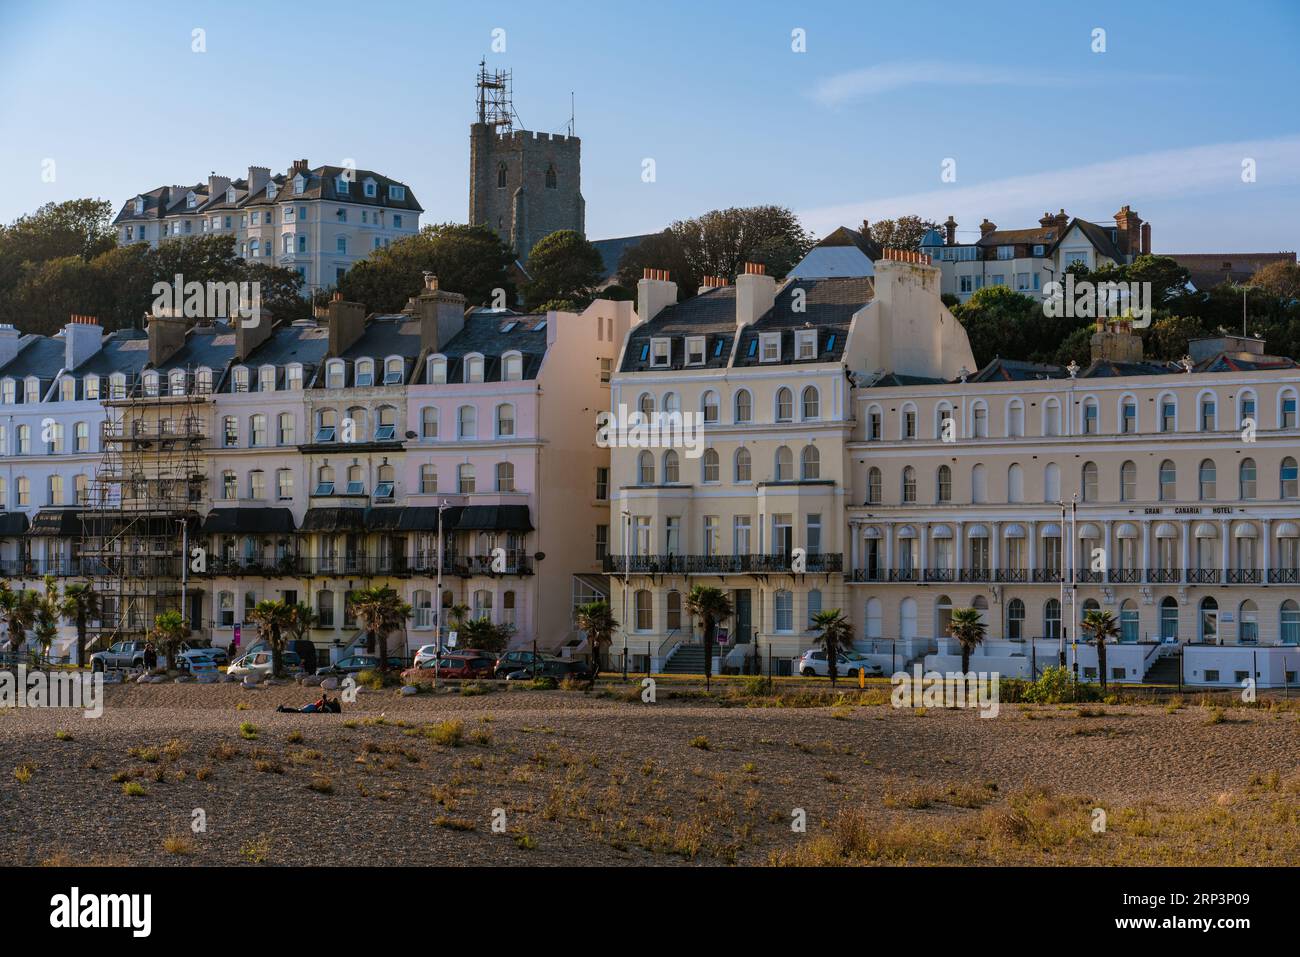 This is a view of traditional British buildings and houses along the beachfront area on September 22, 2021 in Folkestone, United Kingdom Stock Photo